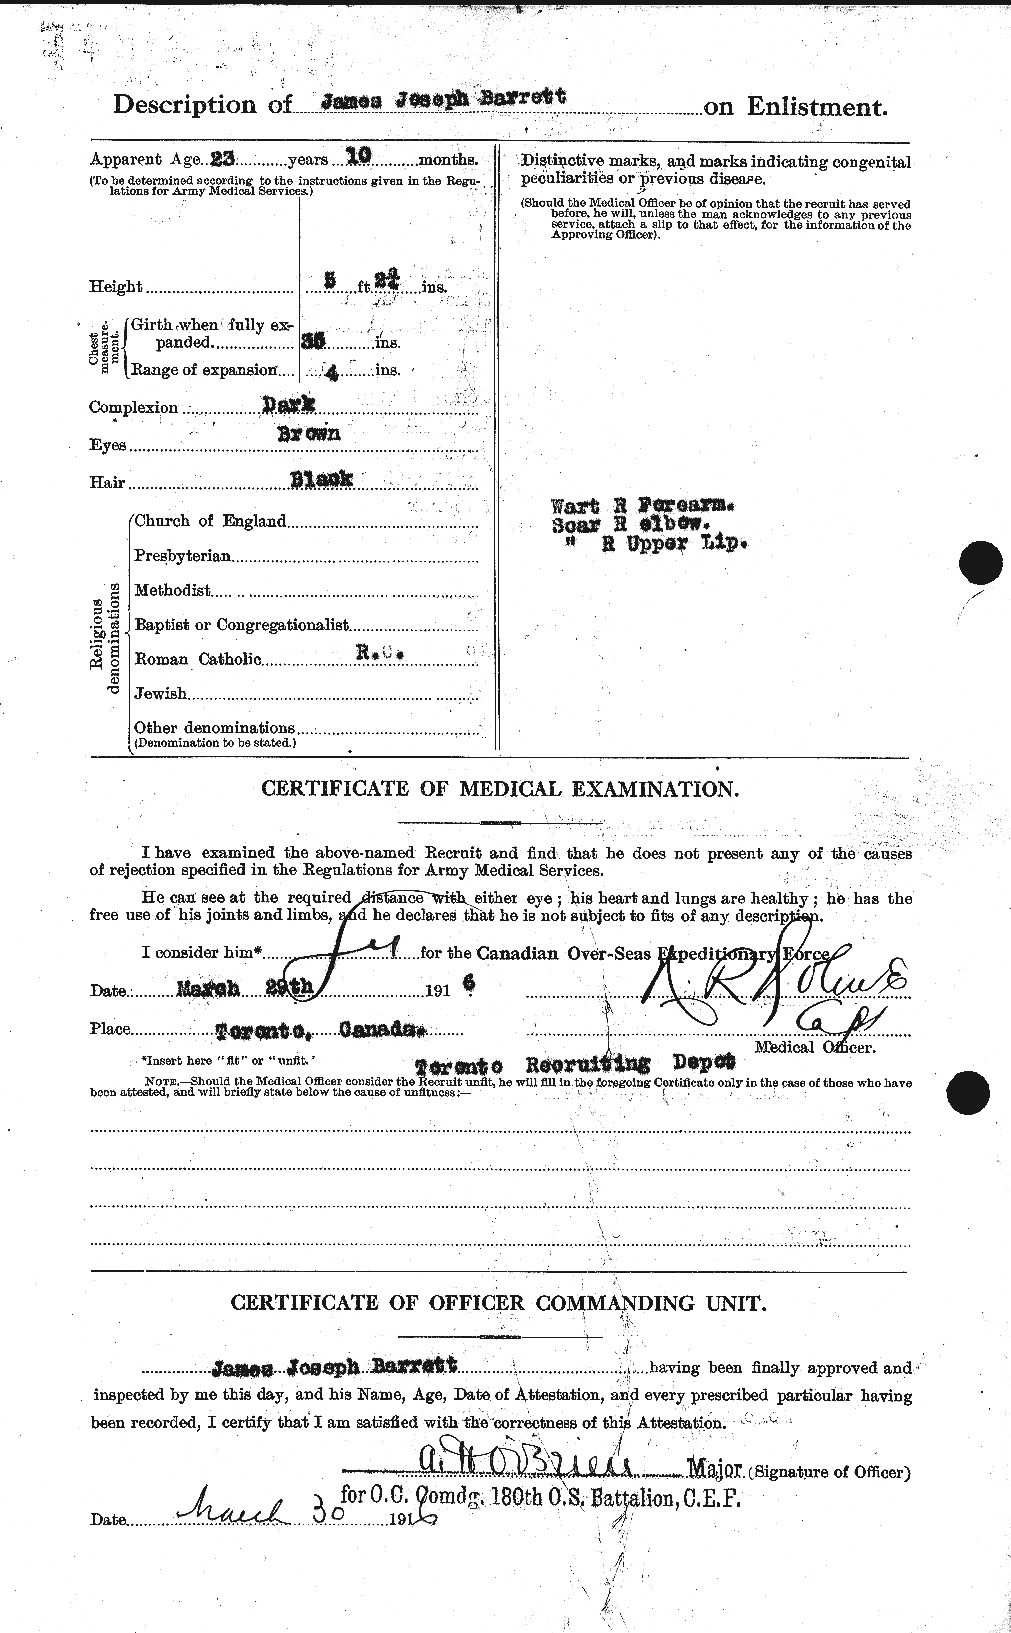 Personnel Records of the First World War - CEF 220259b